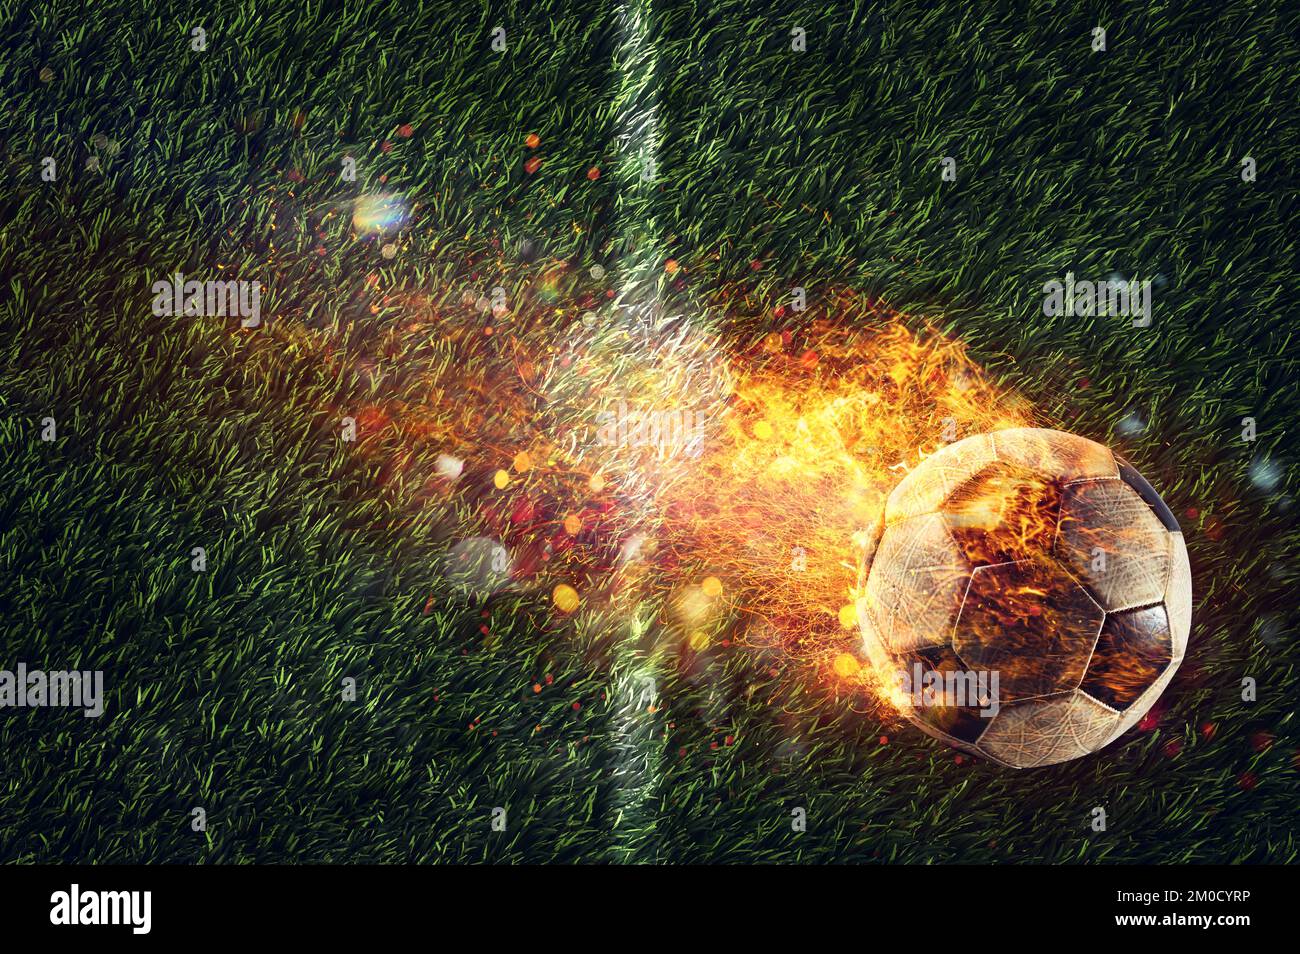 fiery soccer ball on black background, sports betting hot offer